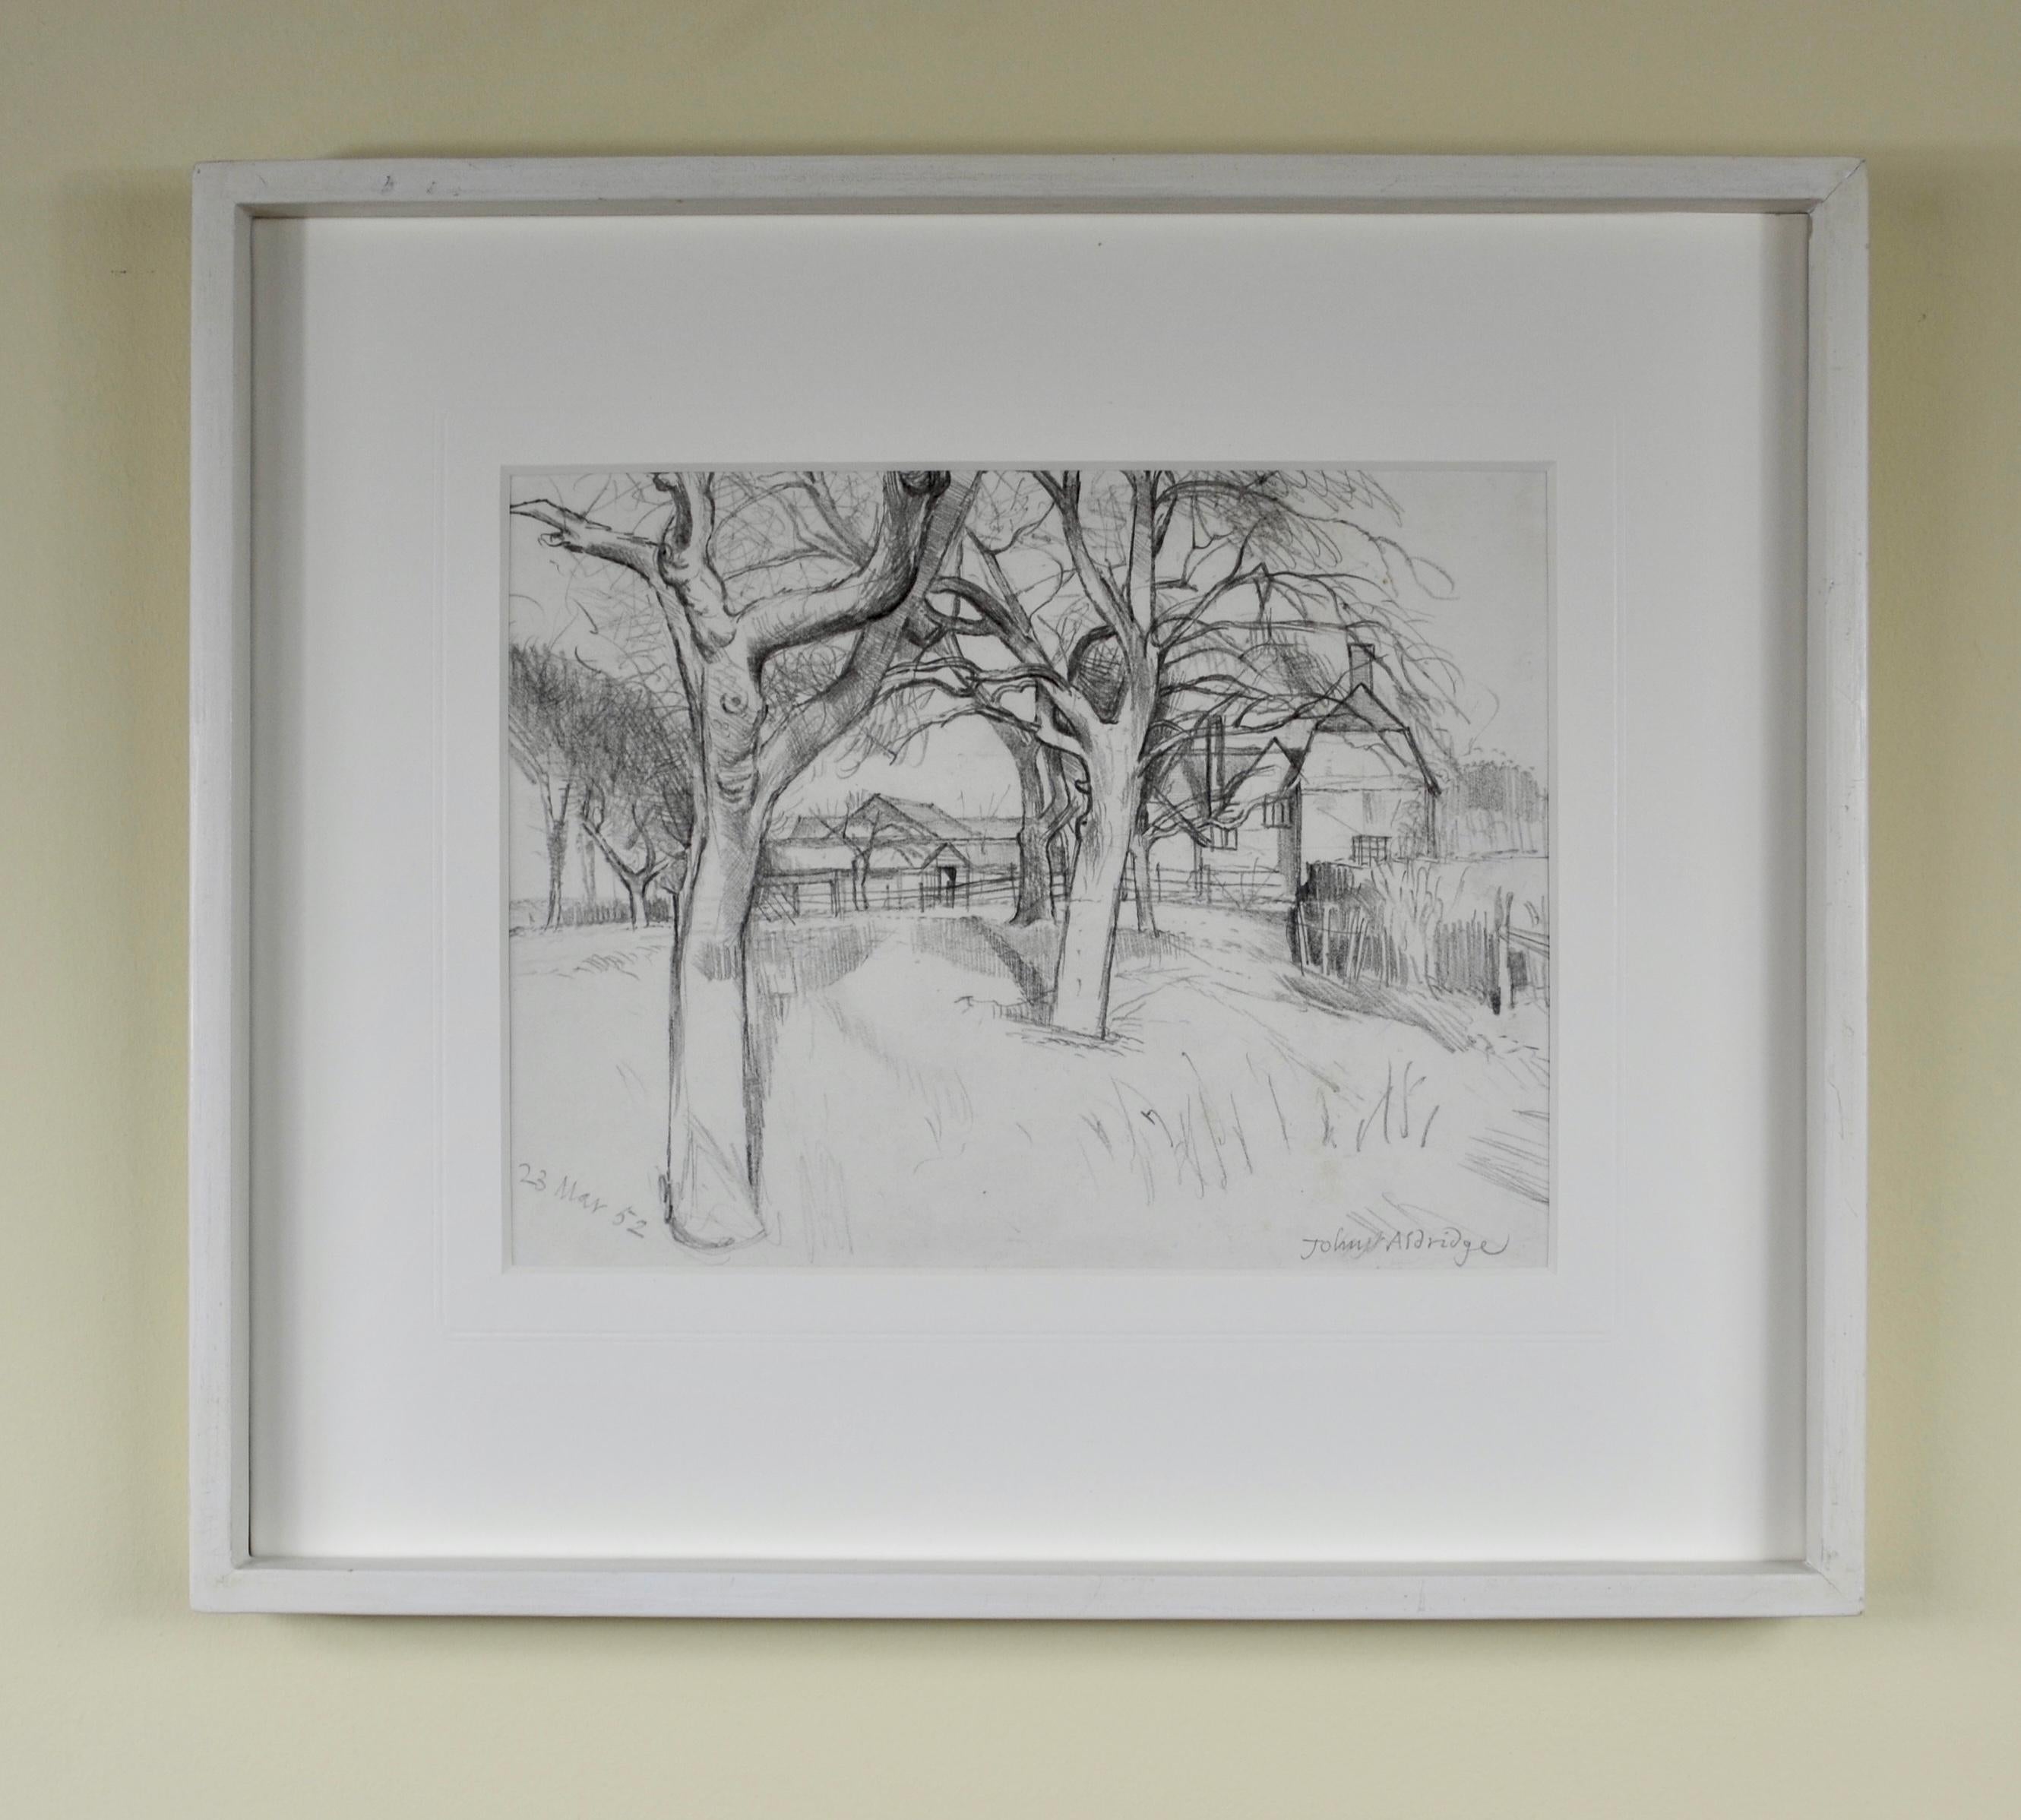 JOHN ALDRIDGE, RA
 (1905-1983)

Orchard, Claypit Hall Farm, Great Bardfield, Essex

Signed and dated 23 Mar 52
Pencil

18.5 by 24 cm.,  7 ¼ by 309 ½ in. 
(frame size 33.5 by 38.5 cm., 13 ¼  by 15 ¼ in.)

John Arthur Malcolm Aldridge was born in